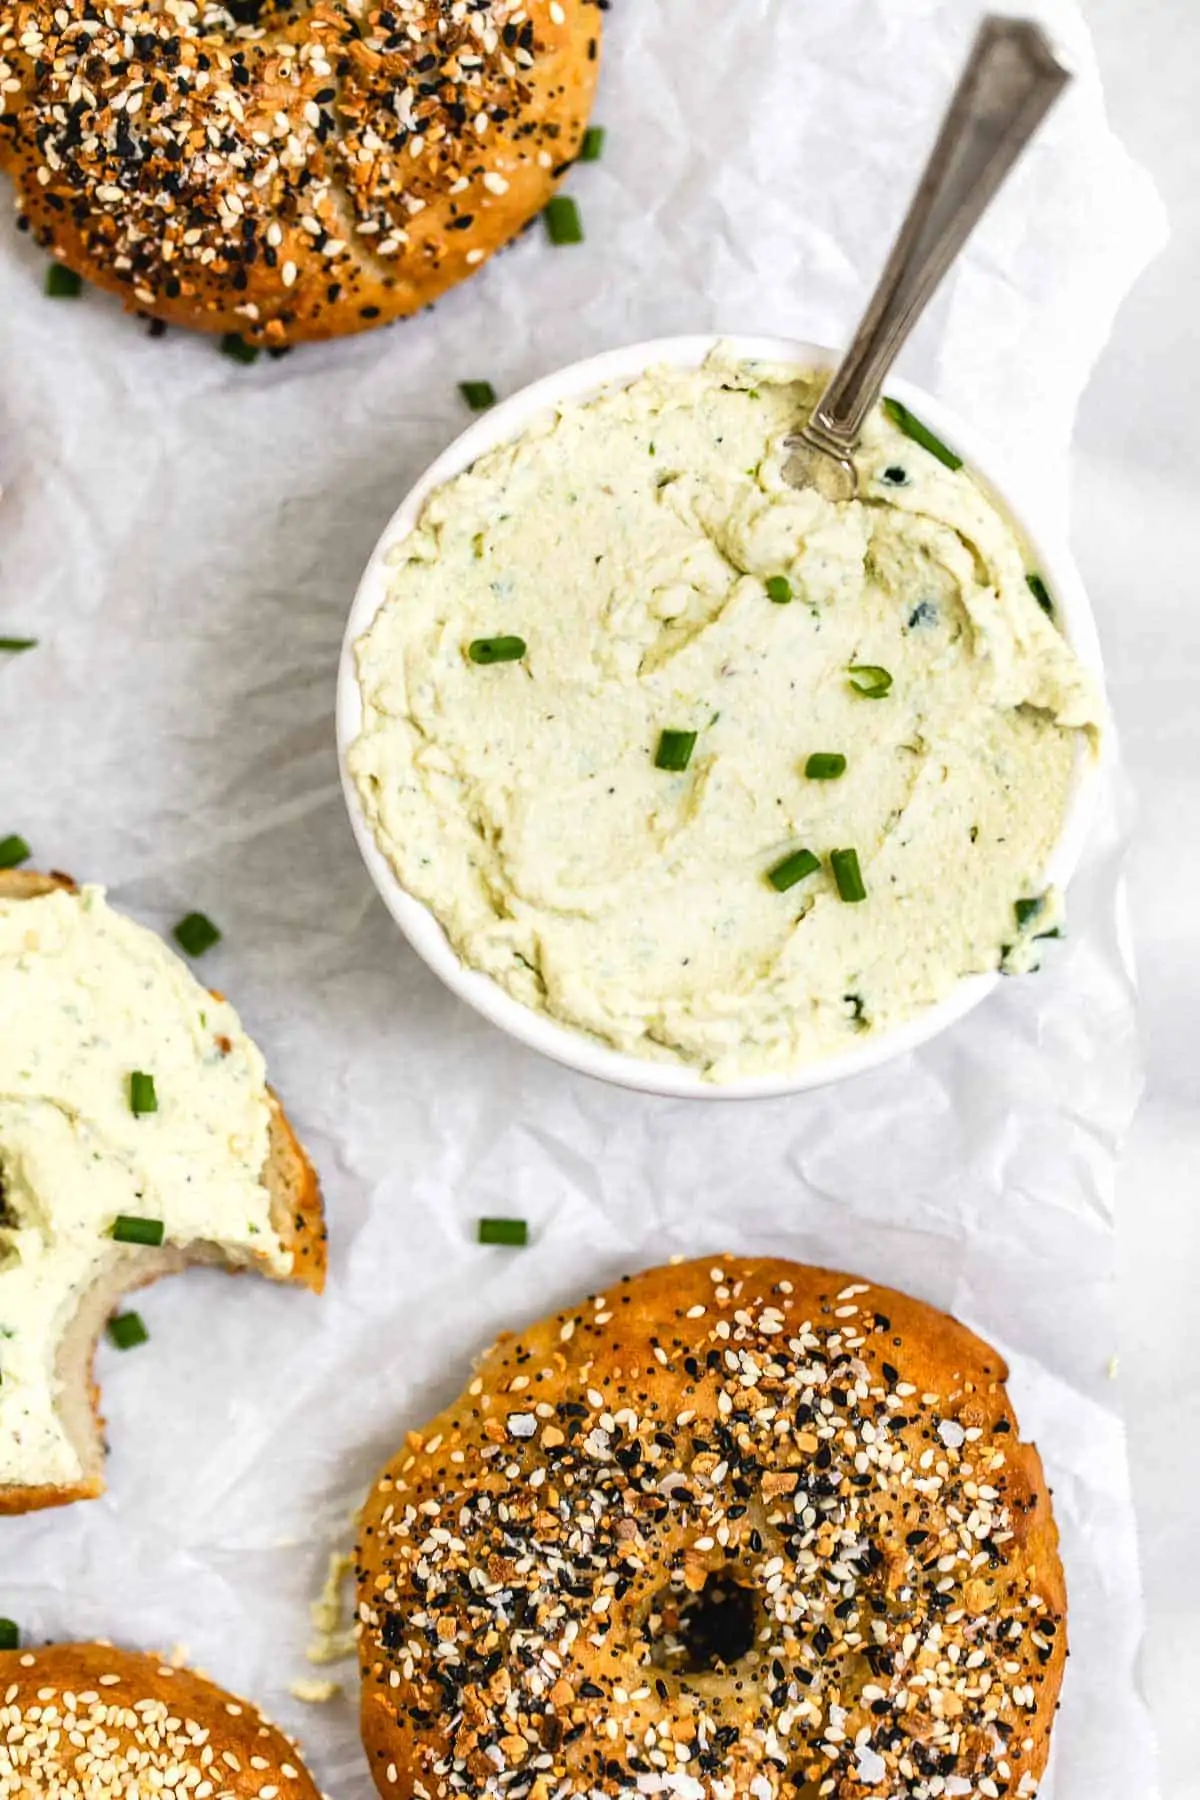 Overhead image of the cream cheese with chives.